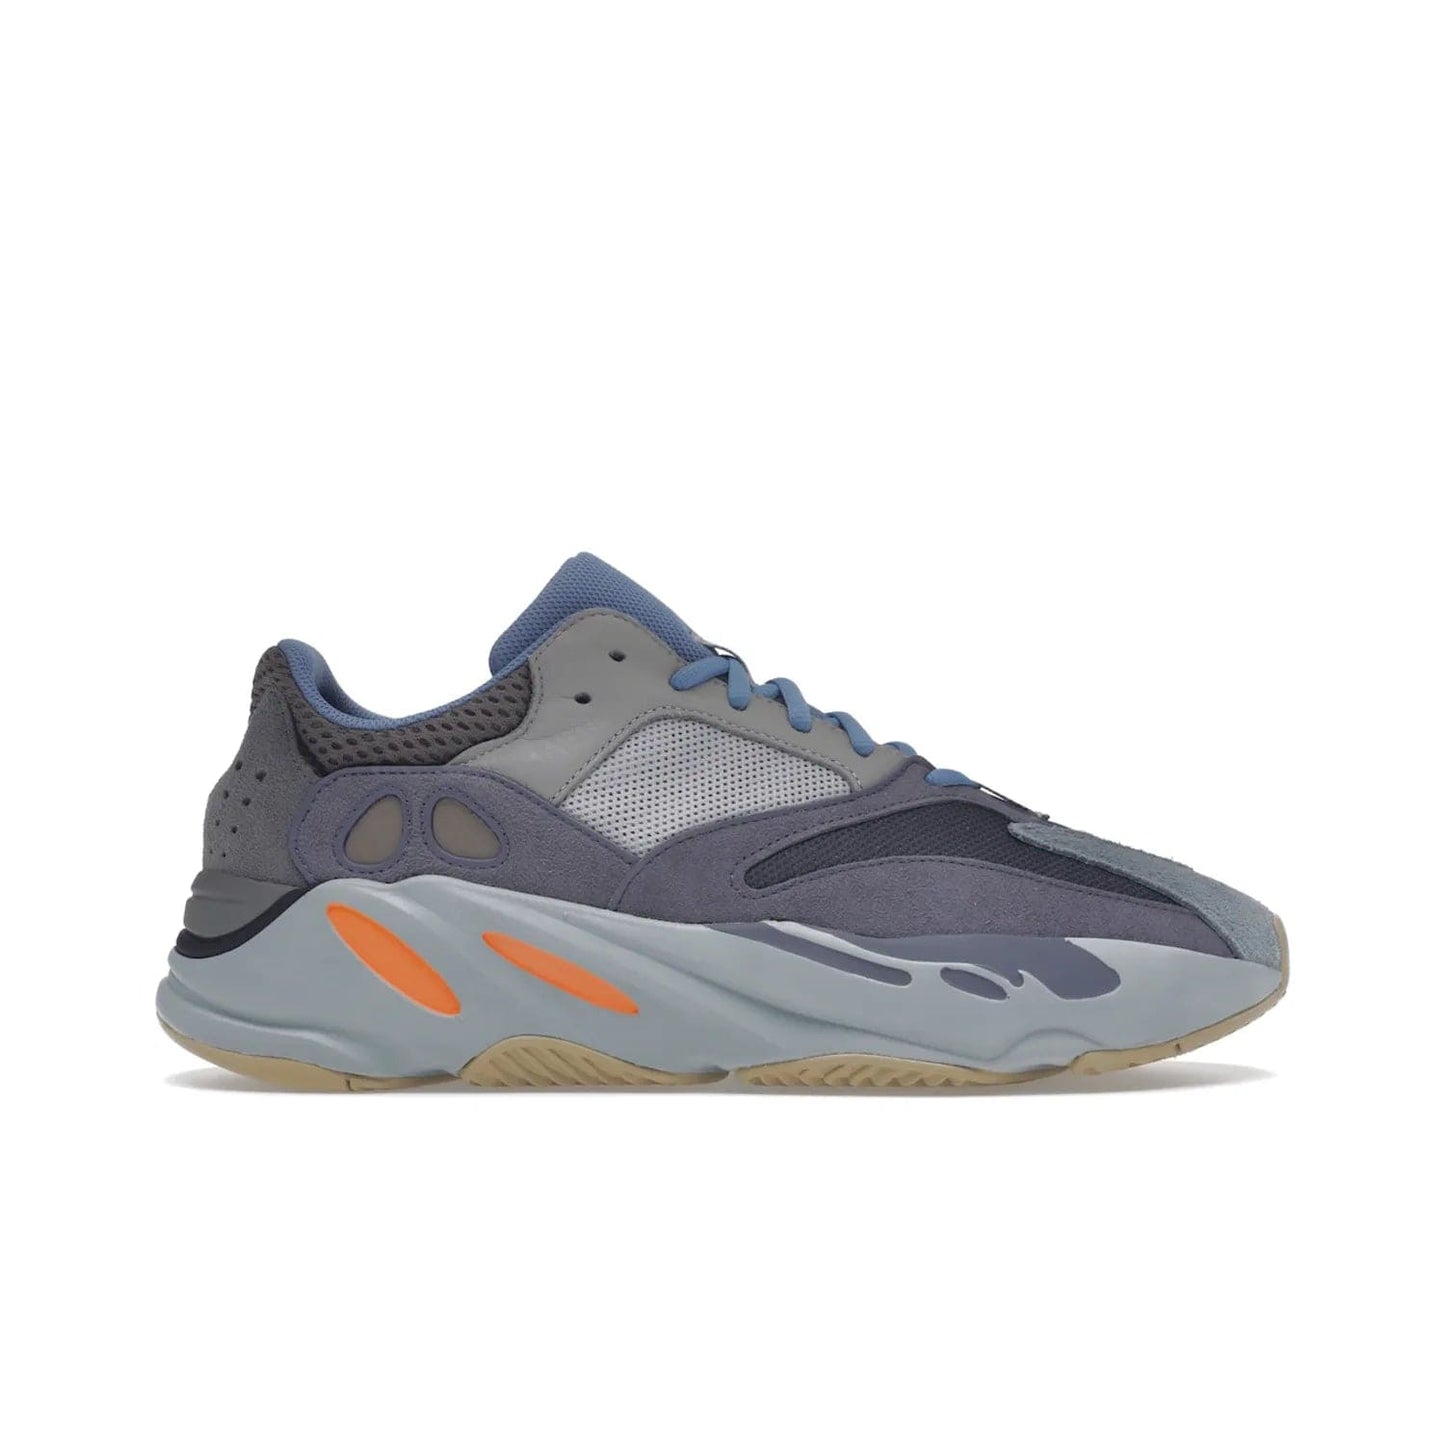 adidas Yeezy Boost 700 Carbon Blue - Image 1 - Only at www.BallersClubKickz.com - Style meets practicality with the adidas Yeezy Boost 700 Carbon Blue. Tonal grey and carbon blue mix of suede and mesh upper, grey midsole and gum outsole. Get yours today.